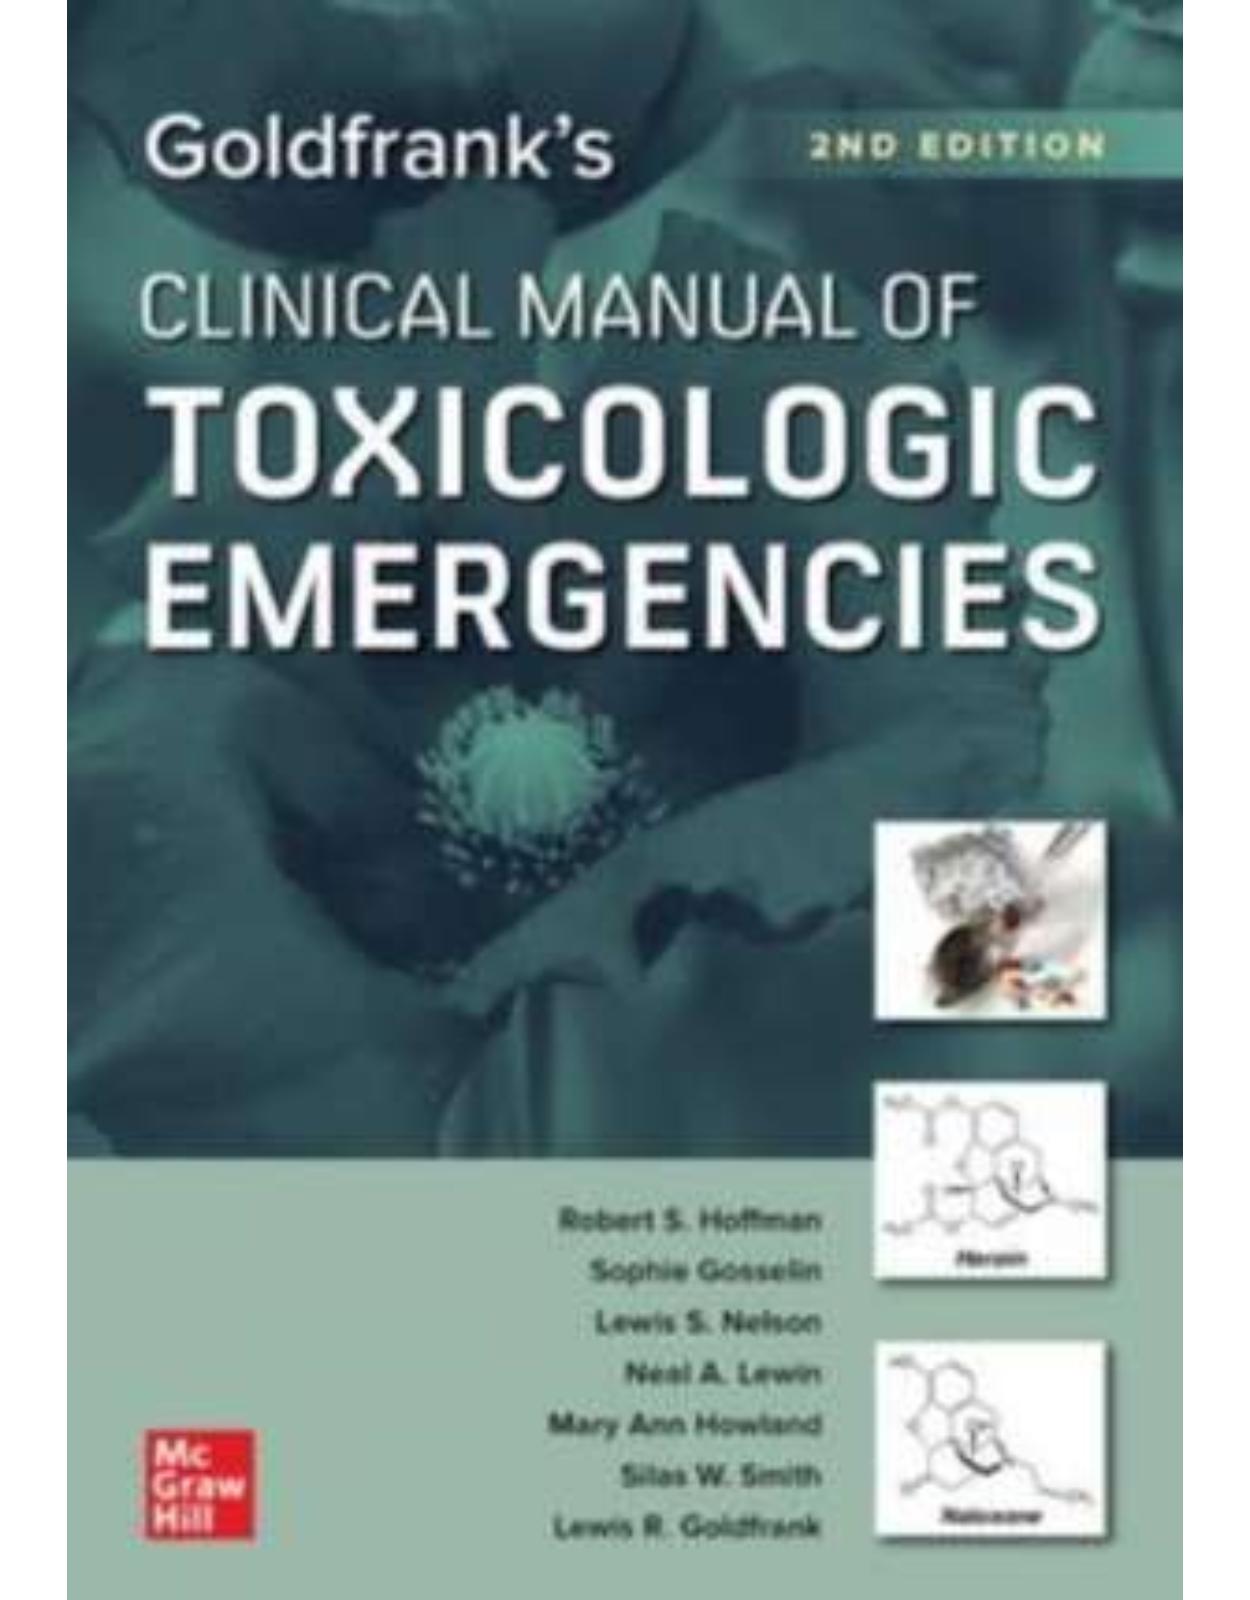 Goldfranks Clinical Manual of Toxicologic Emergencies, Second Edition